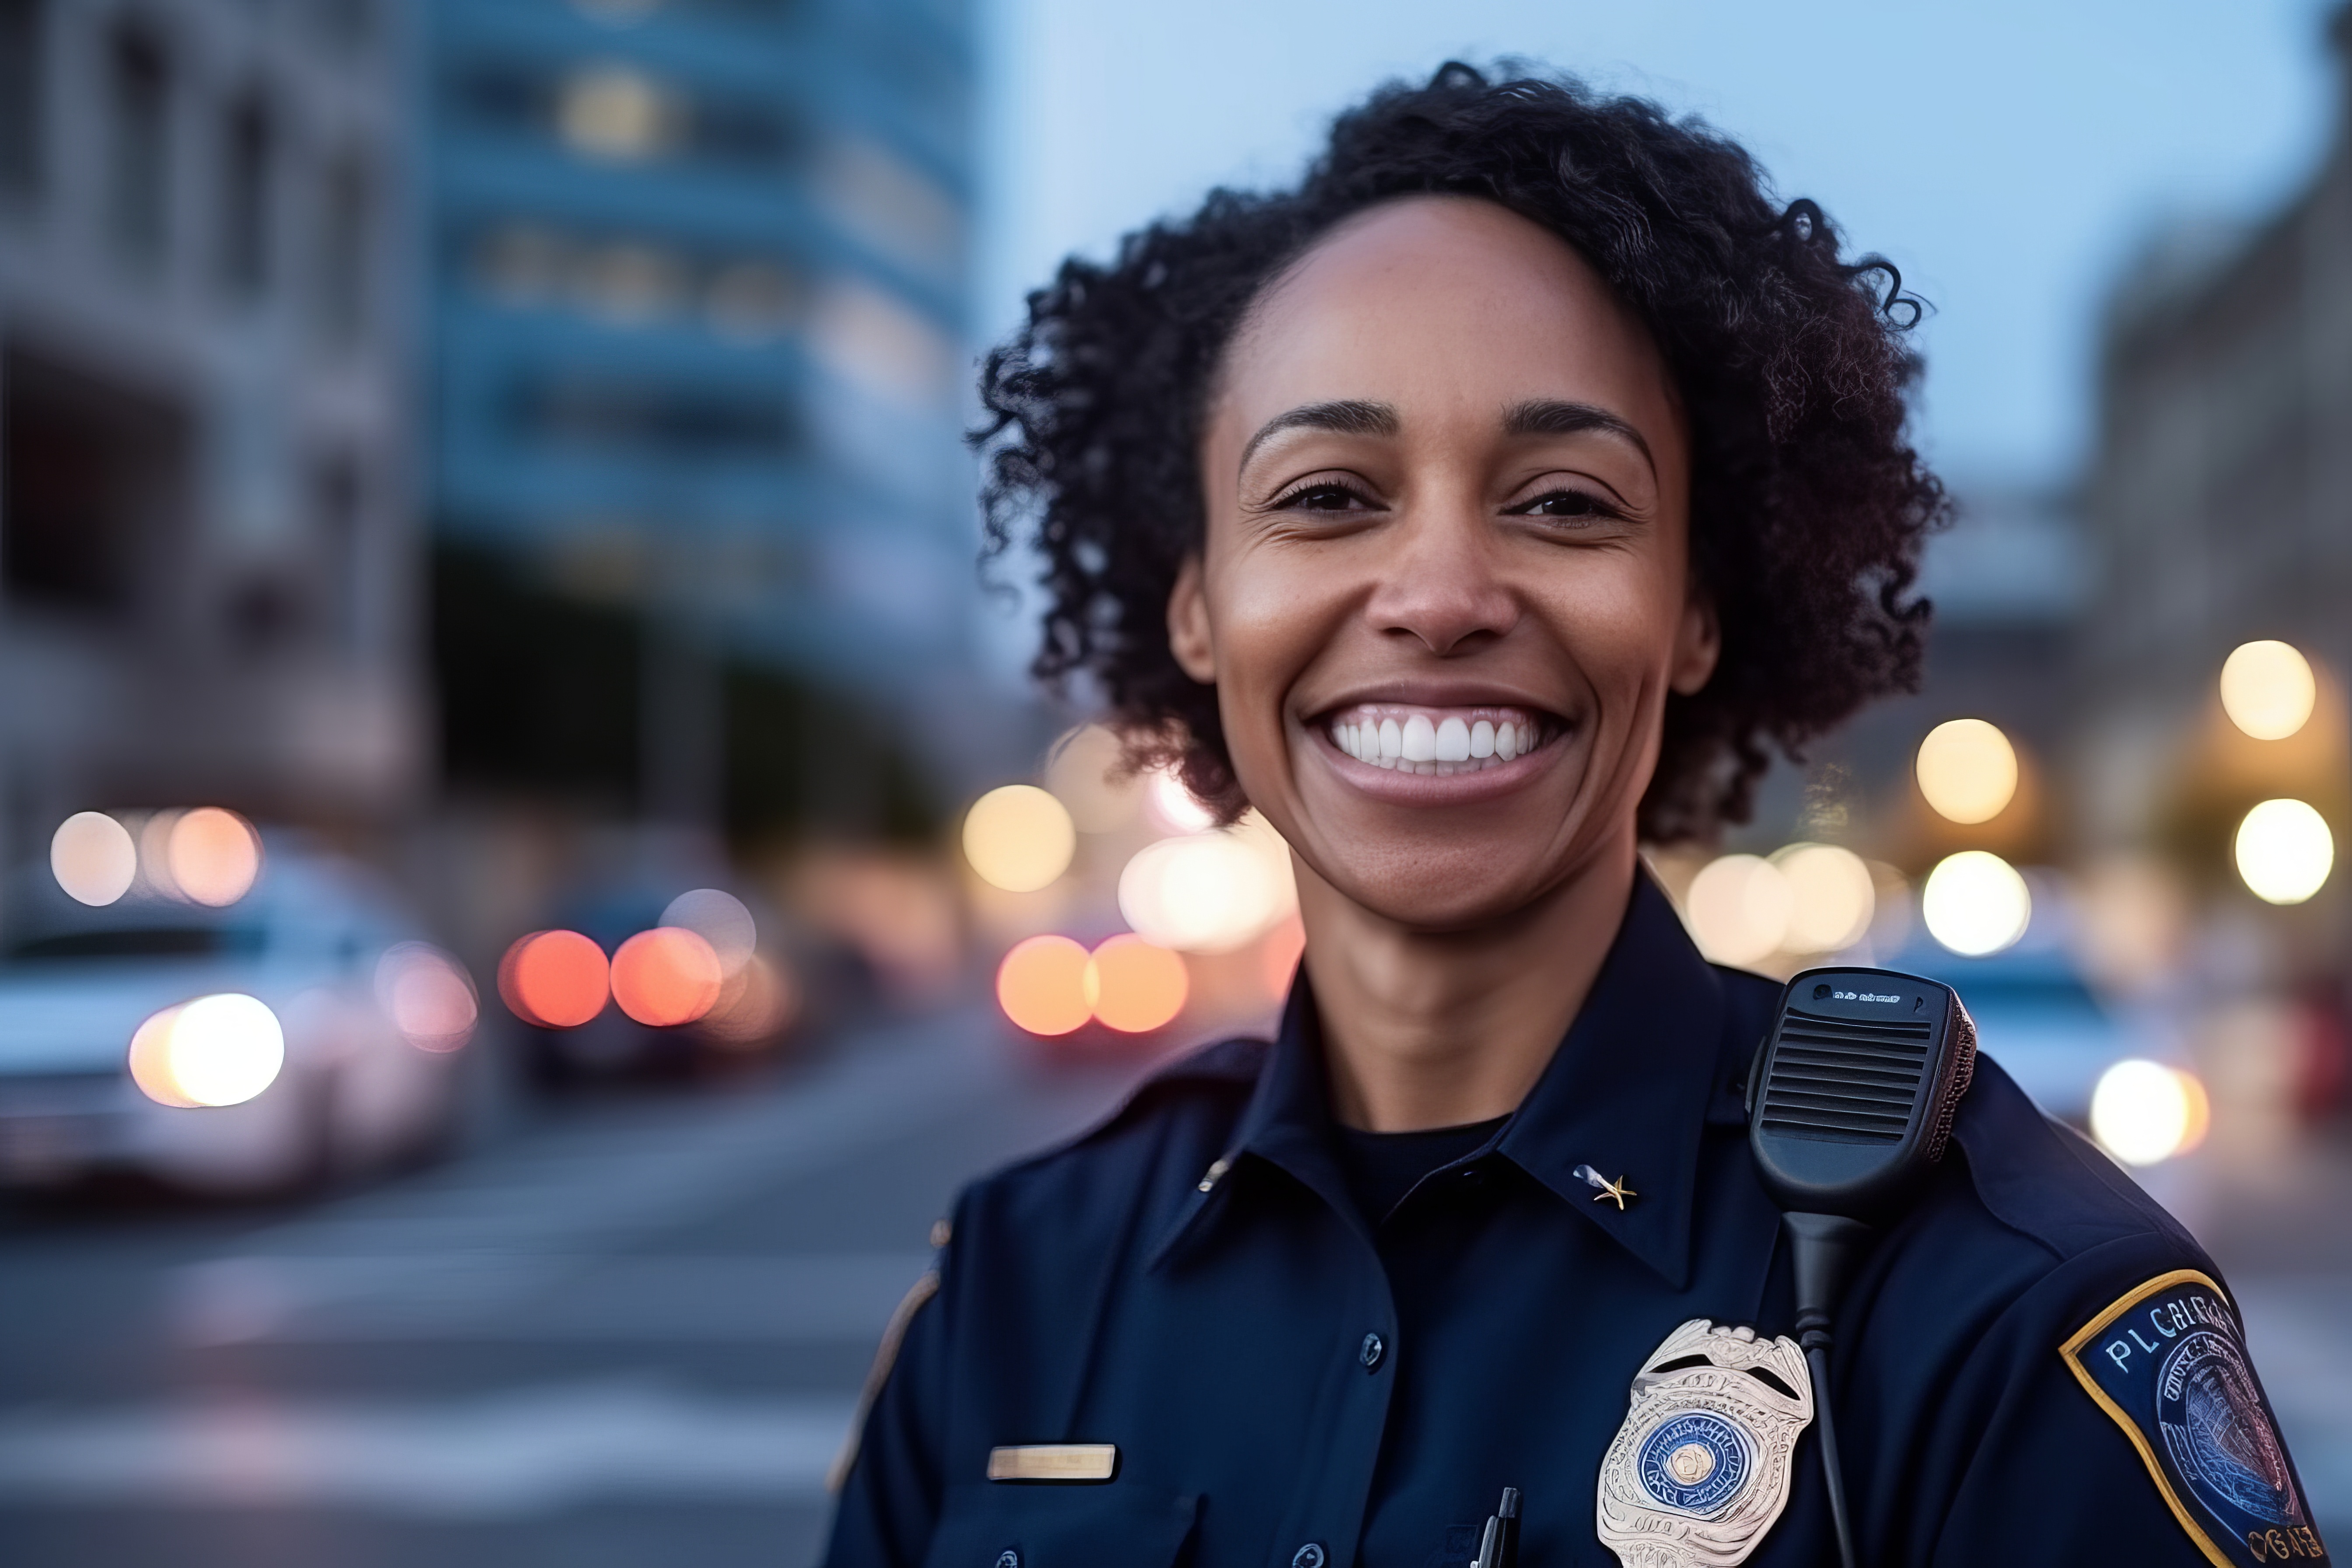 A female uniformed officer smiles with a busy city street in the background.